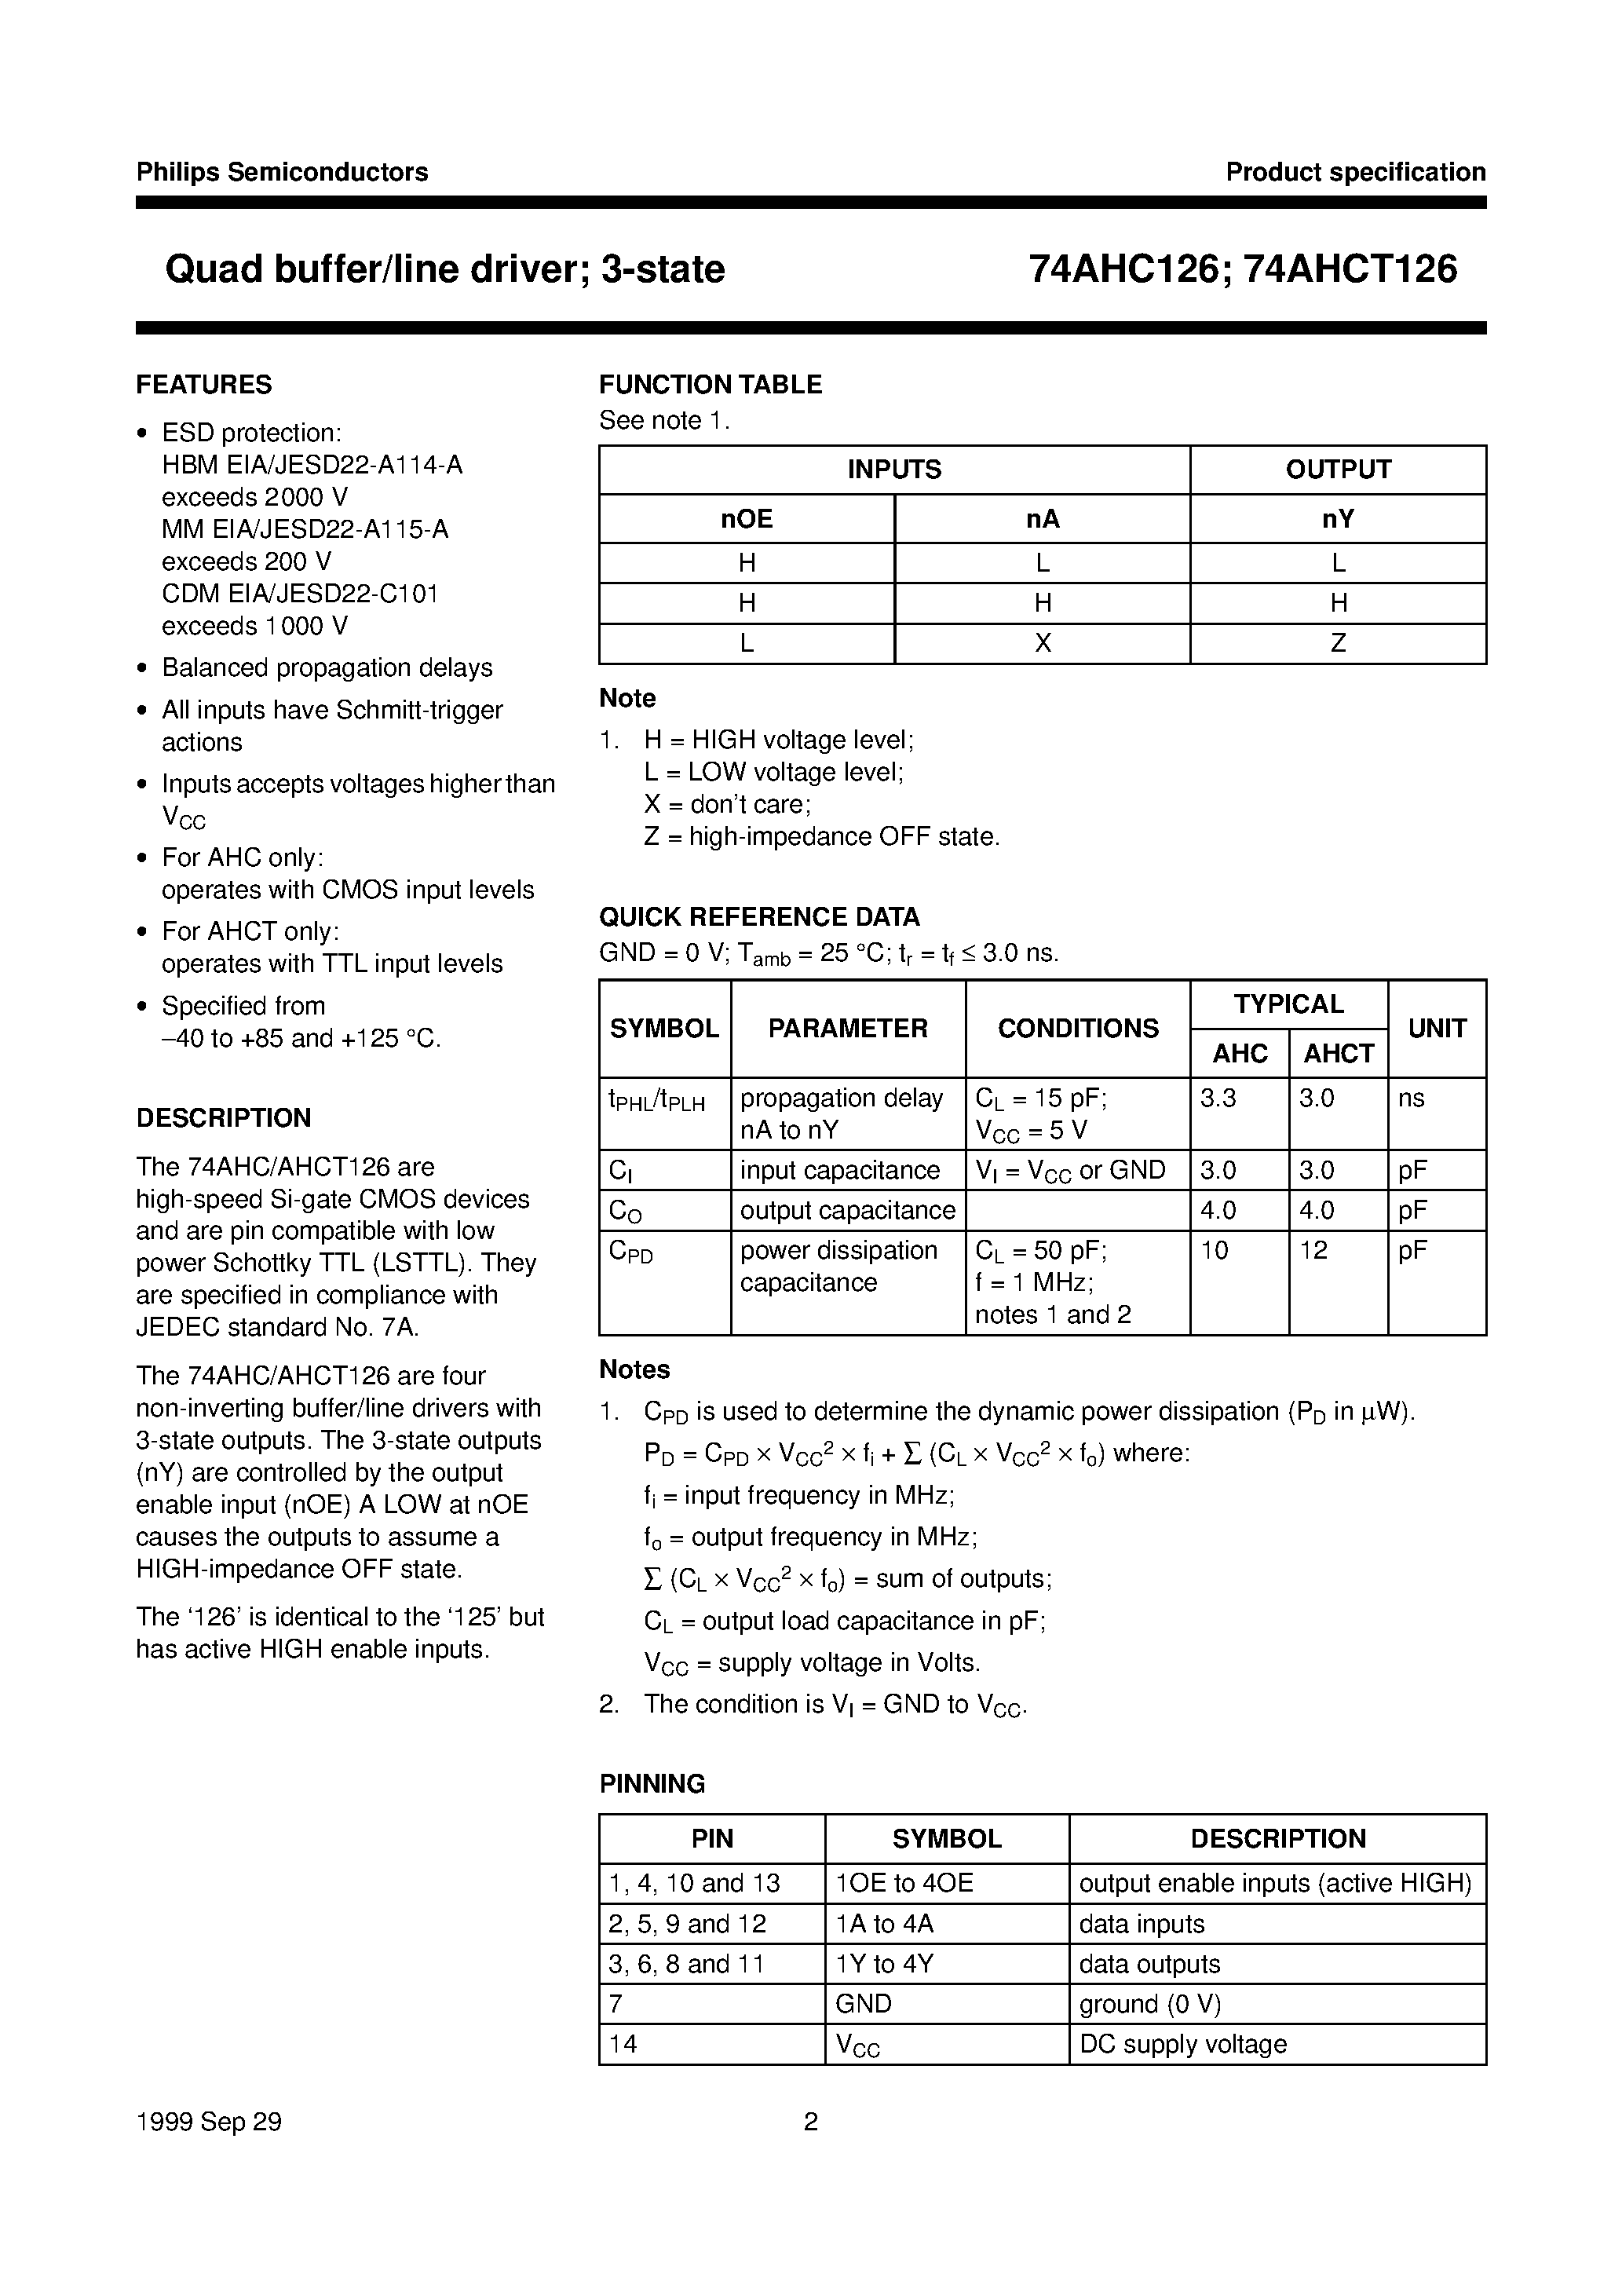 Datasheet 74AHC126PWDH - Quad buffer/line driver; 3-state page 2